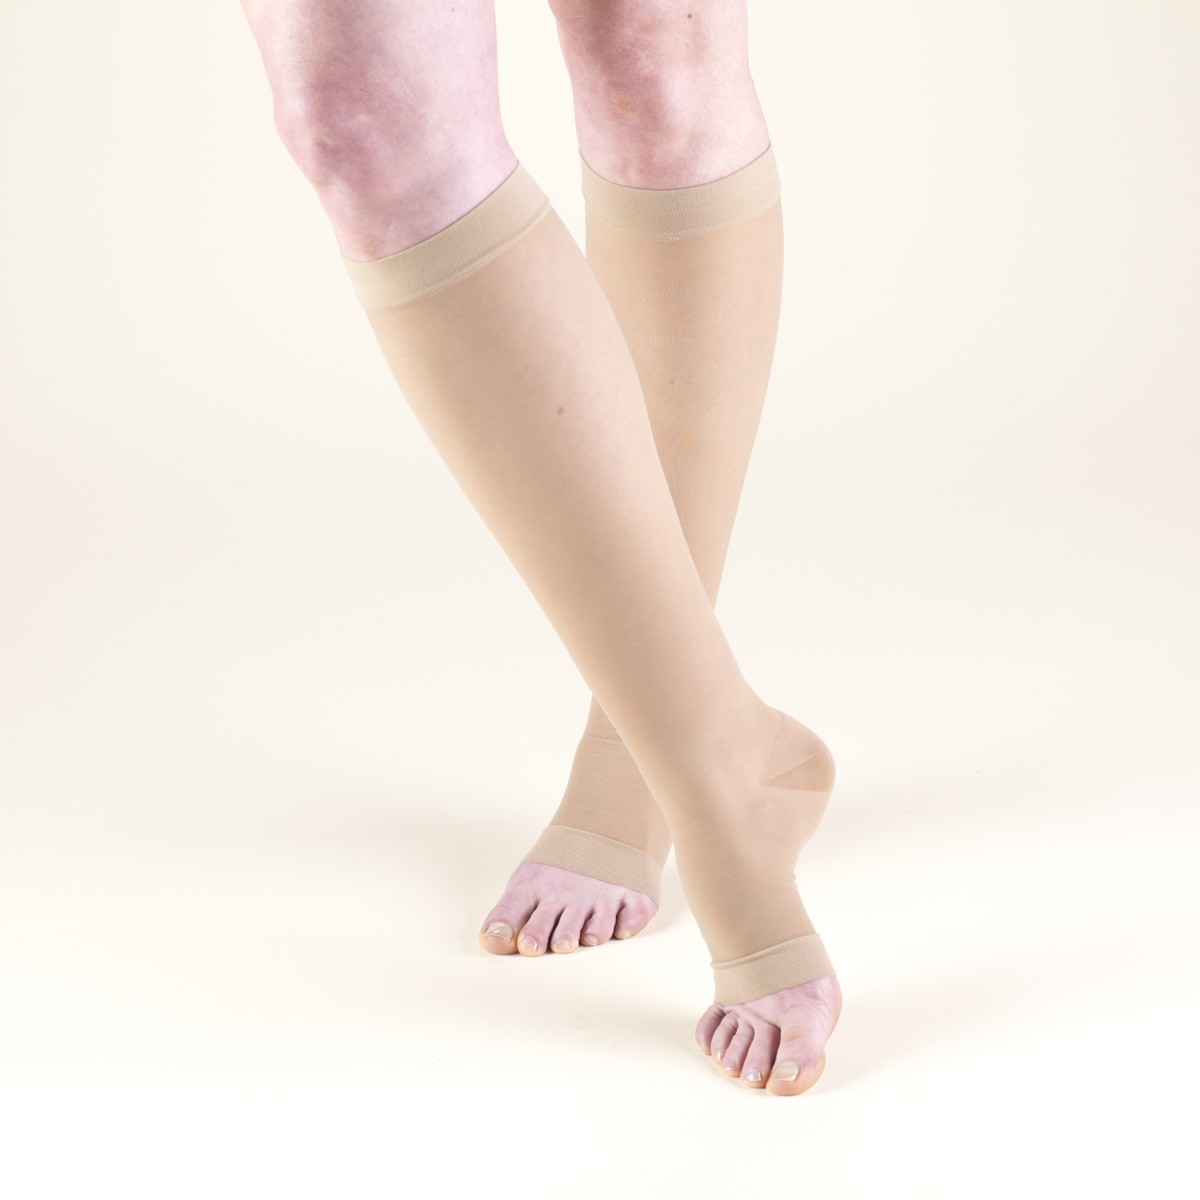 Surgical compression stockings